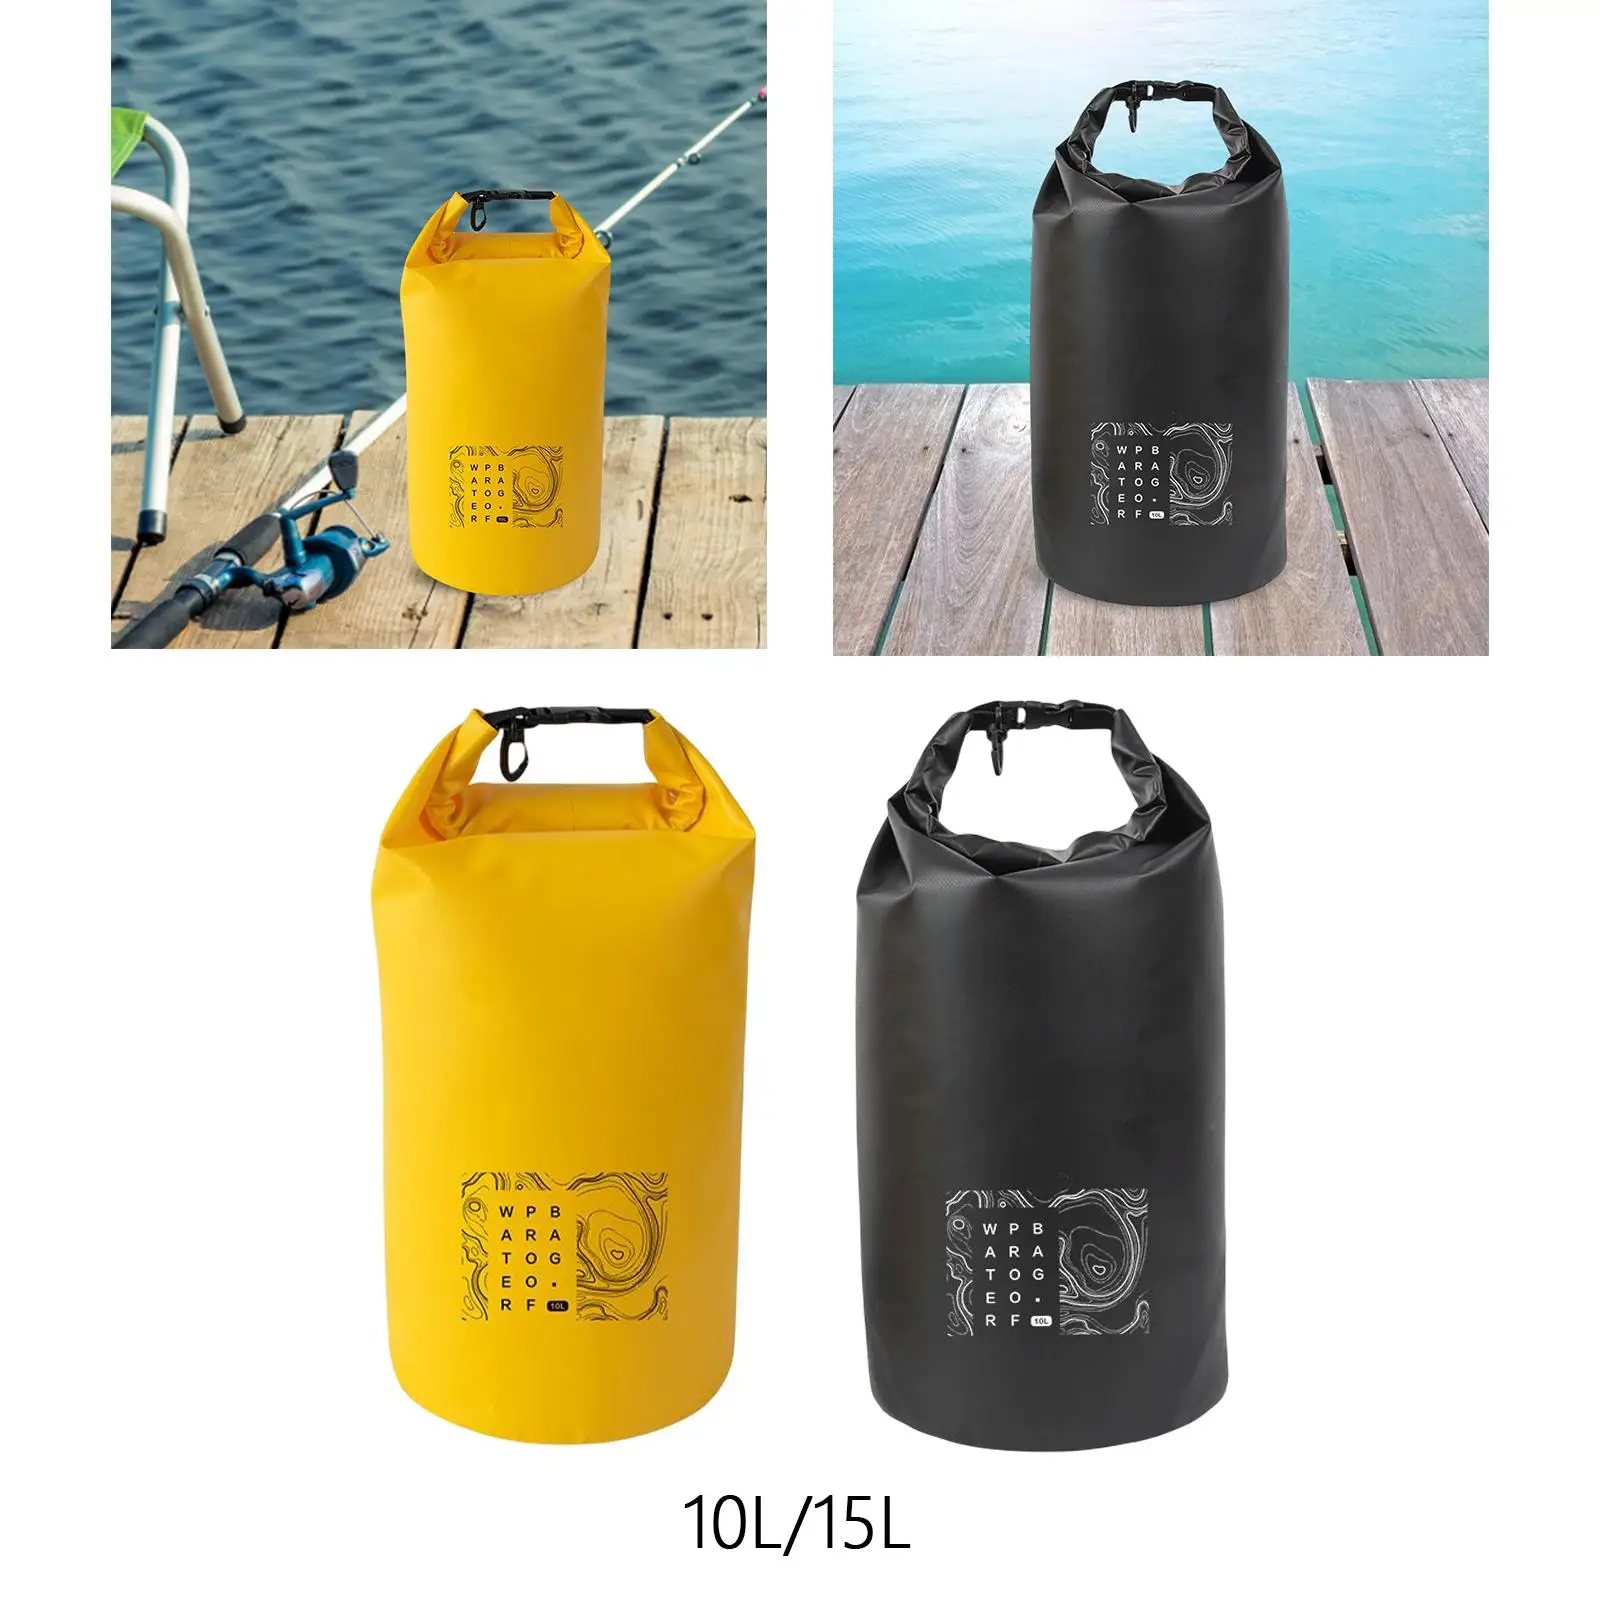 10/15L PVC Waterproof Dry Bag Floating Bag Storage Pack Pouch Fanny Pack Waist Pouch for Beach Swimming Surfing Boating Kayaking